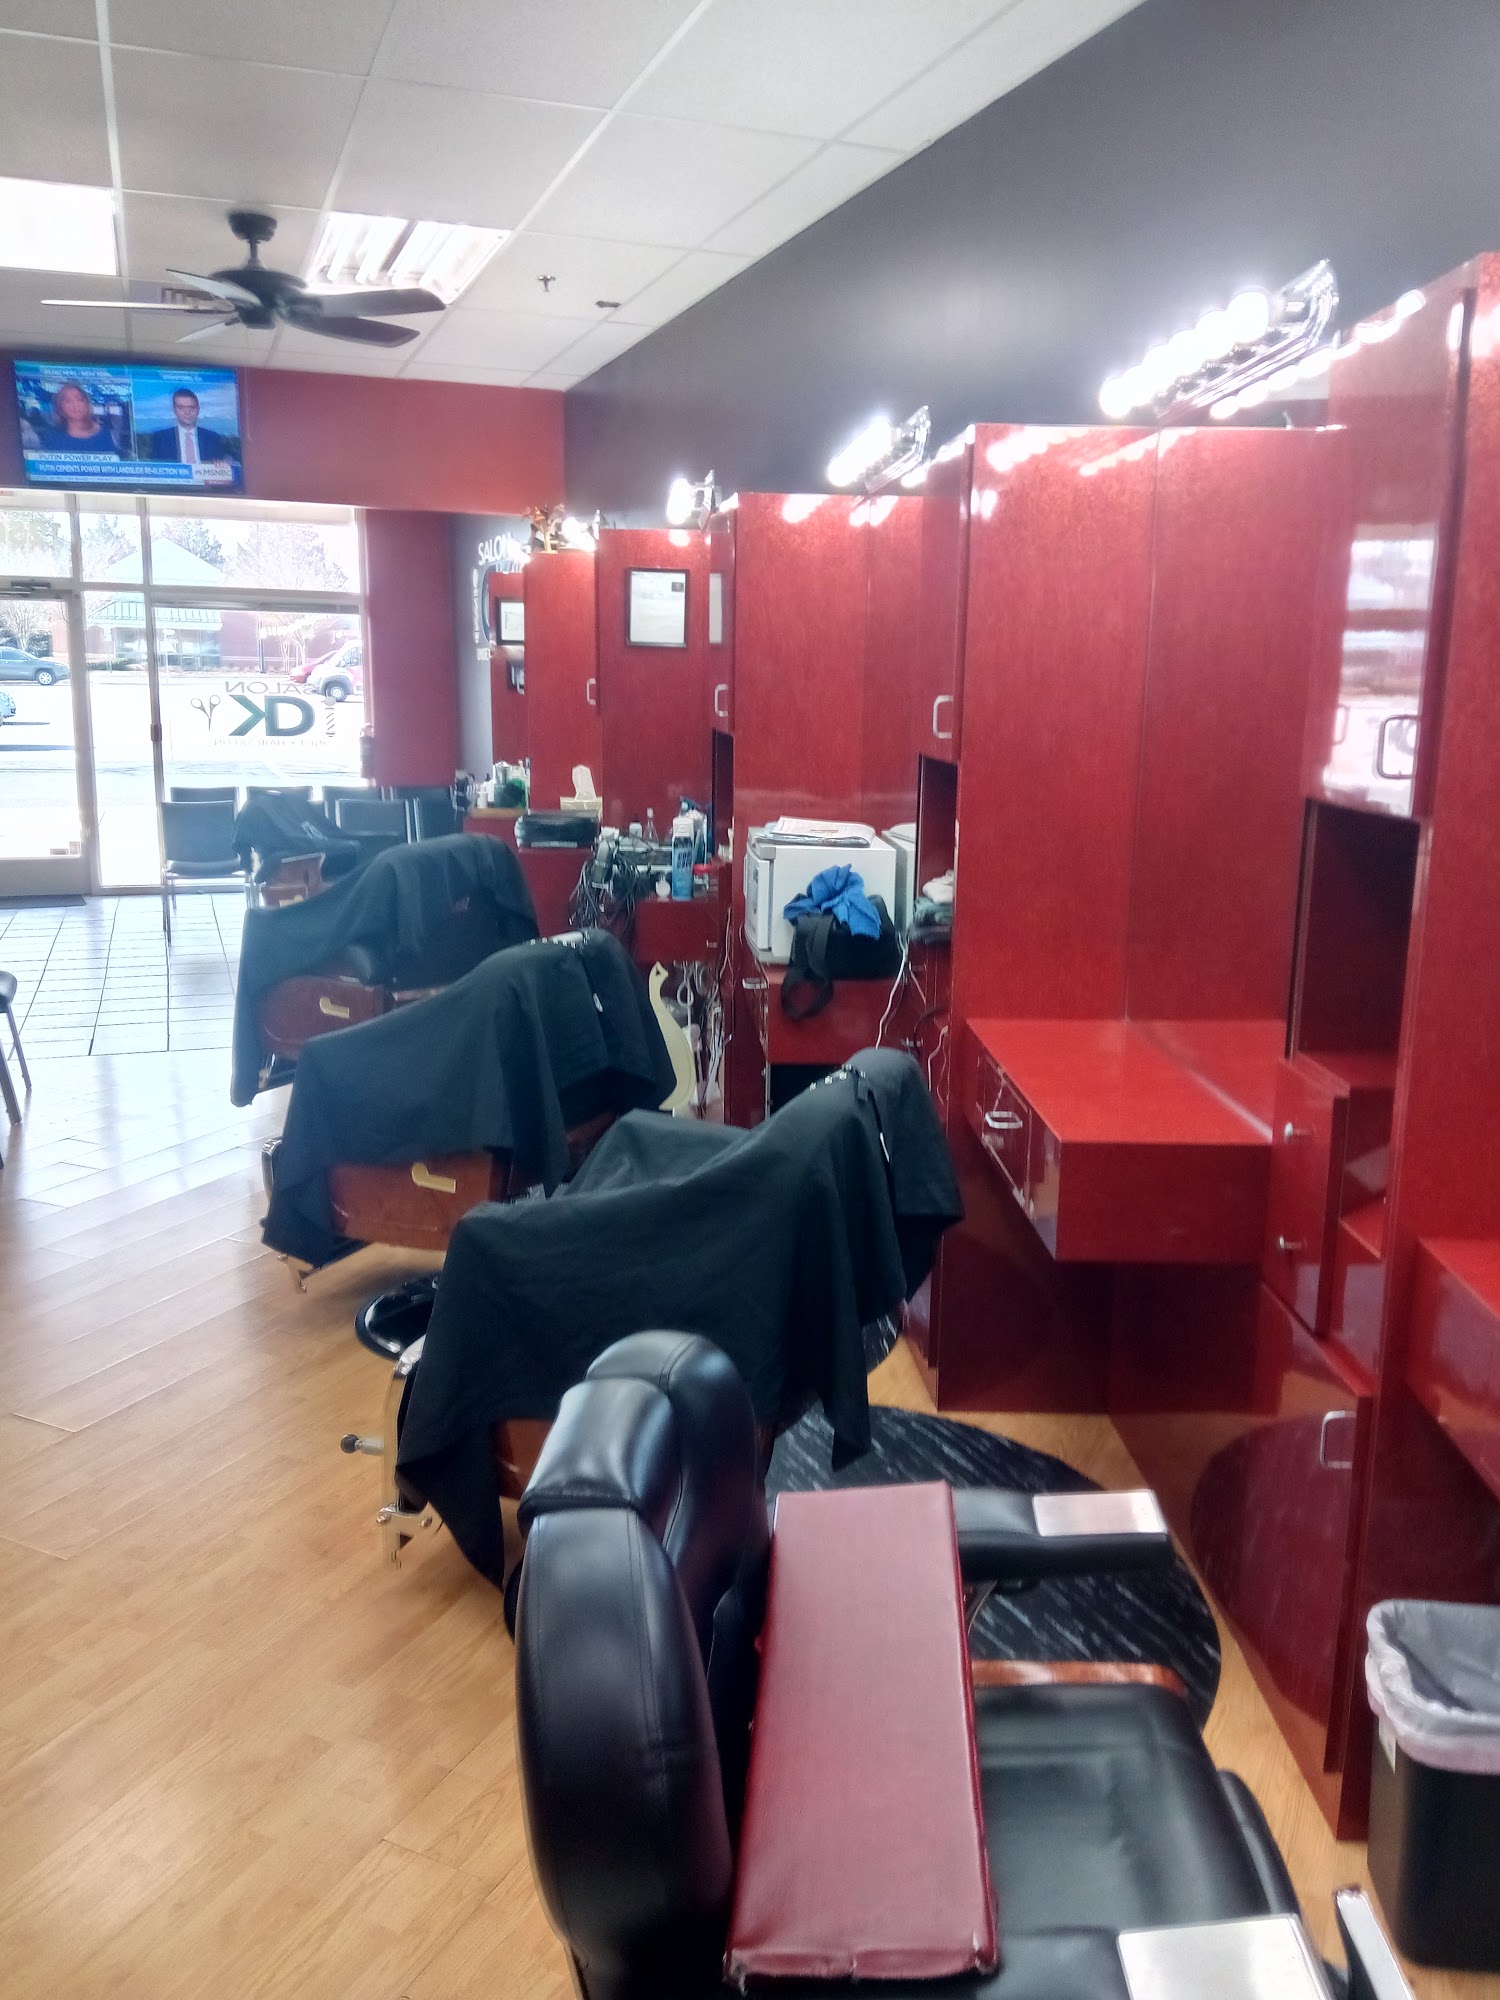 Parlor Grand Salon And Men's Grooming Lounge